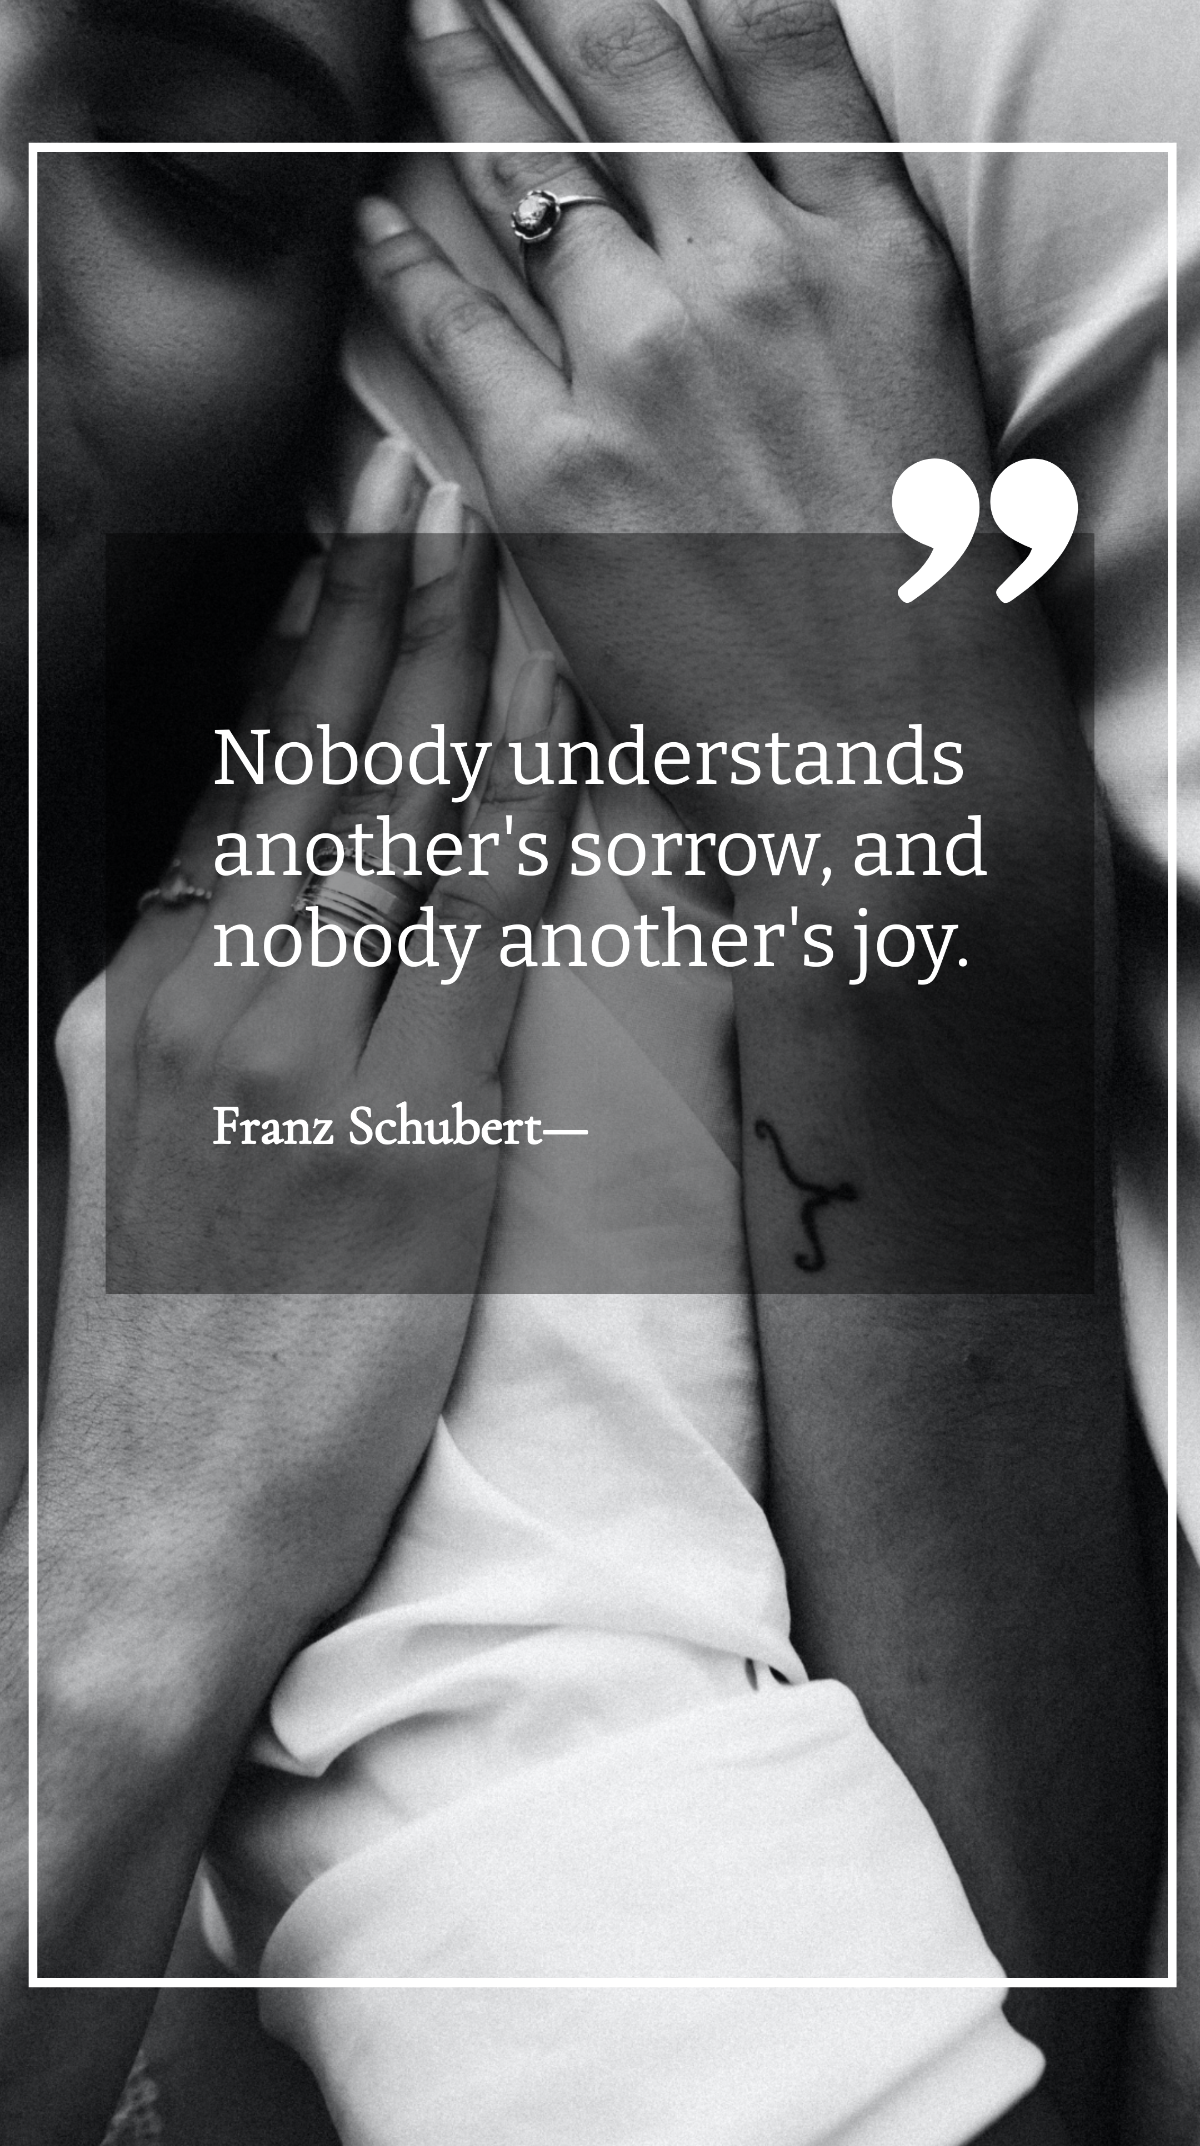  Franz Schubert - Nobody understands another's sorrow, and nobody another's joy. Template